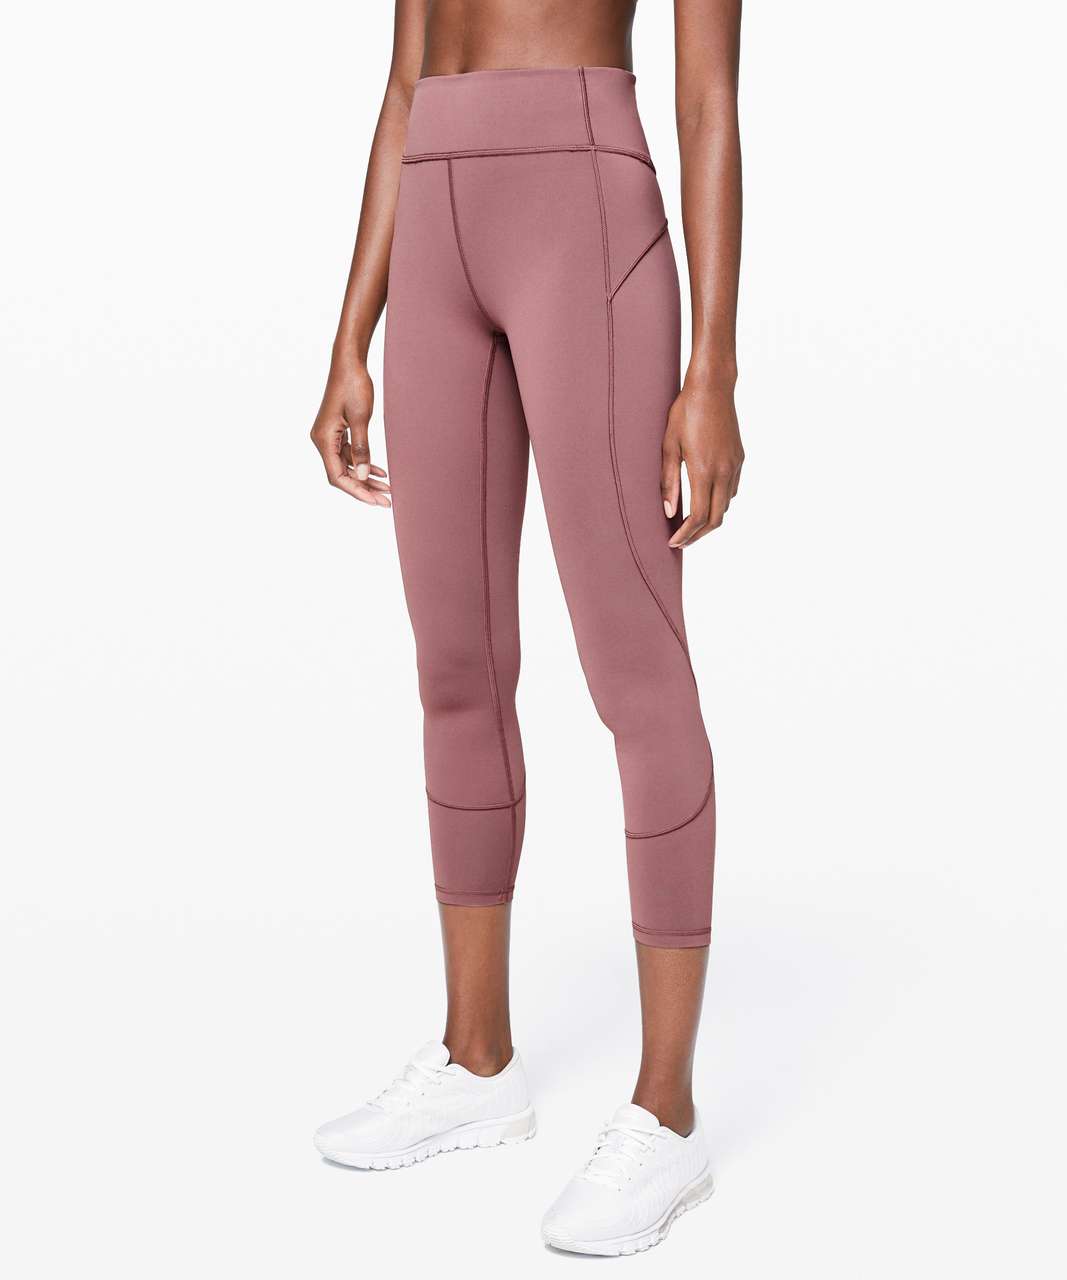 Lululemon In Movement Tight 25" *Everlux - Red Dust